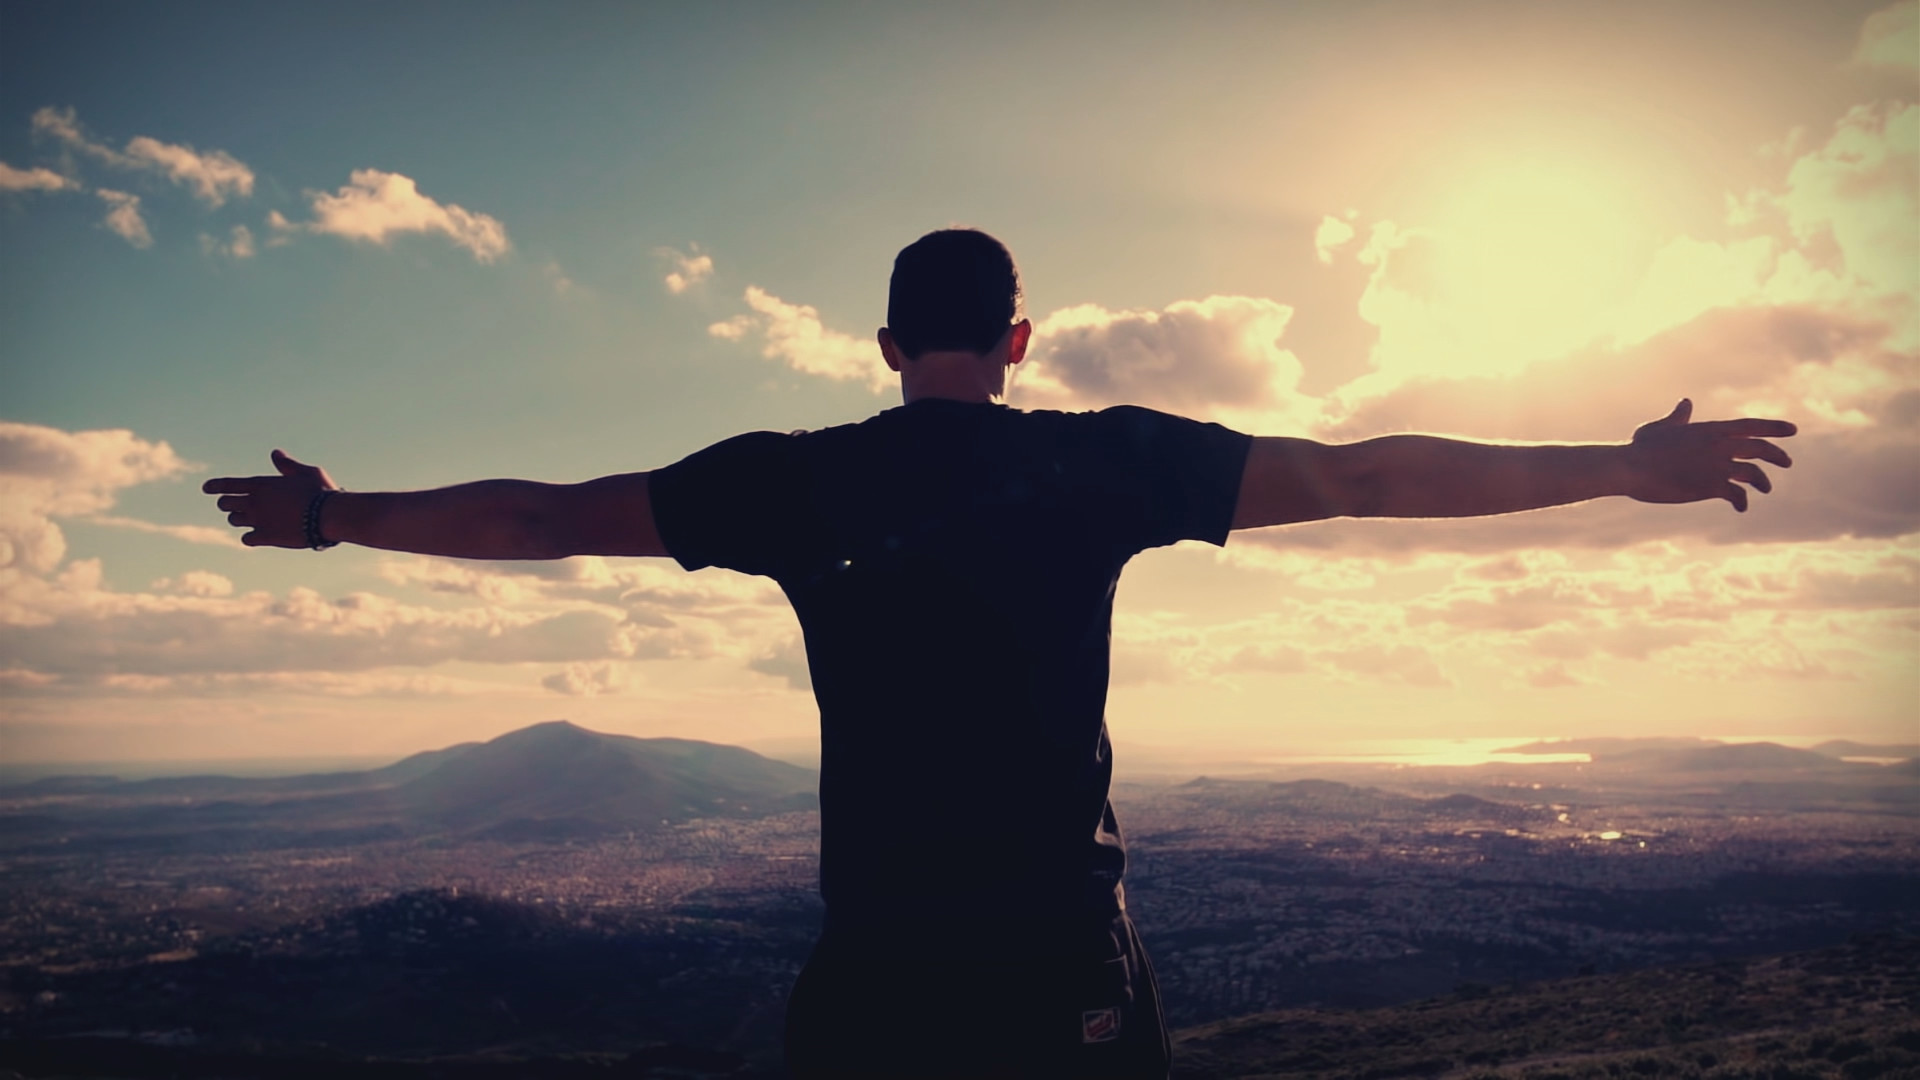 Man standing on a mountain with his arms outstretched looking at the landscape with us.